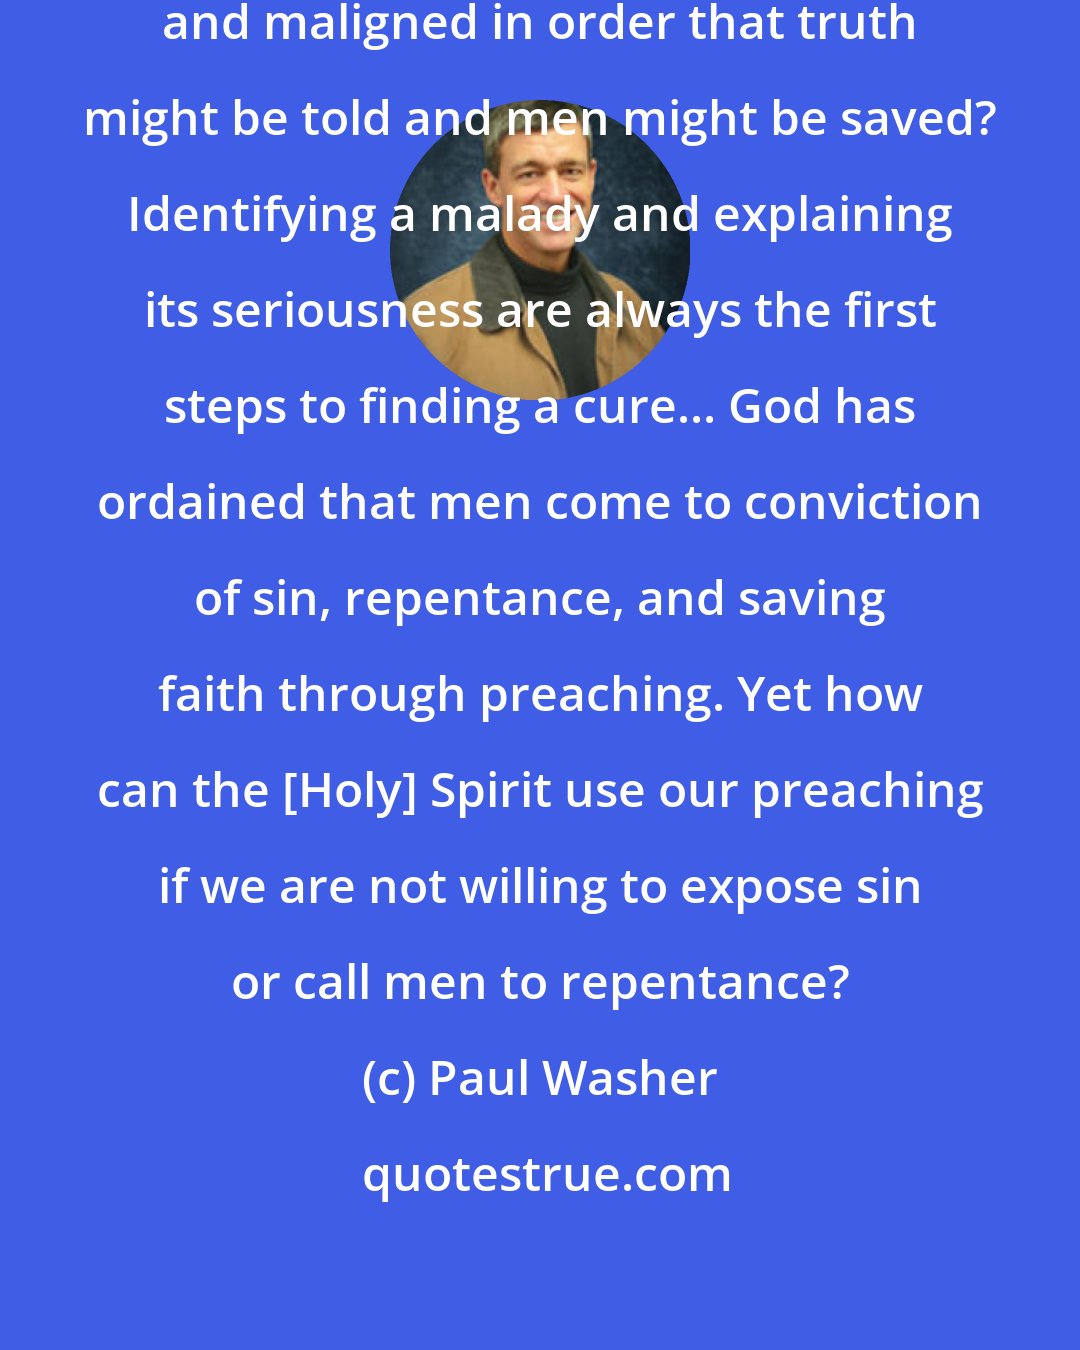 Paul Washer: Are we willing to risk being misunderstood and maligned in order that truth might be told and men might be saved? Identifying a malady and explaining its seriousness are always the first steps to finding a cure... God has ordained that men come to conviction of sin, repentance, and saving faith through preaching. Yet how can the [Holy] Spirit use our preaching if we are not willing to expose sin or call men to repentance?